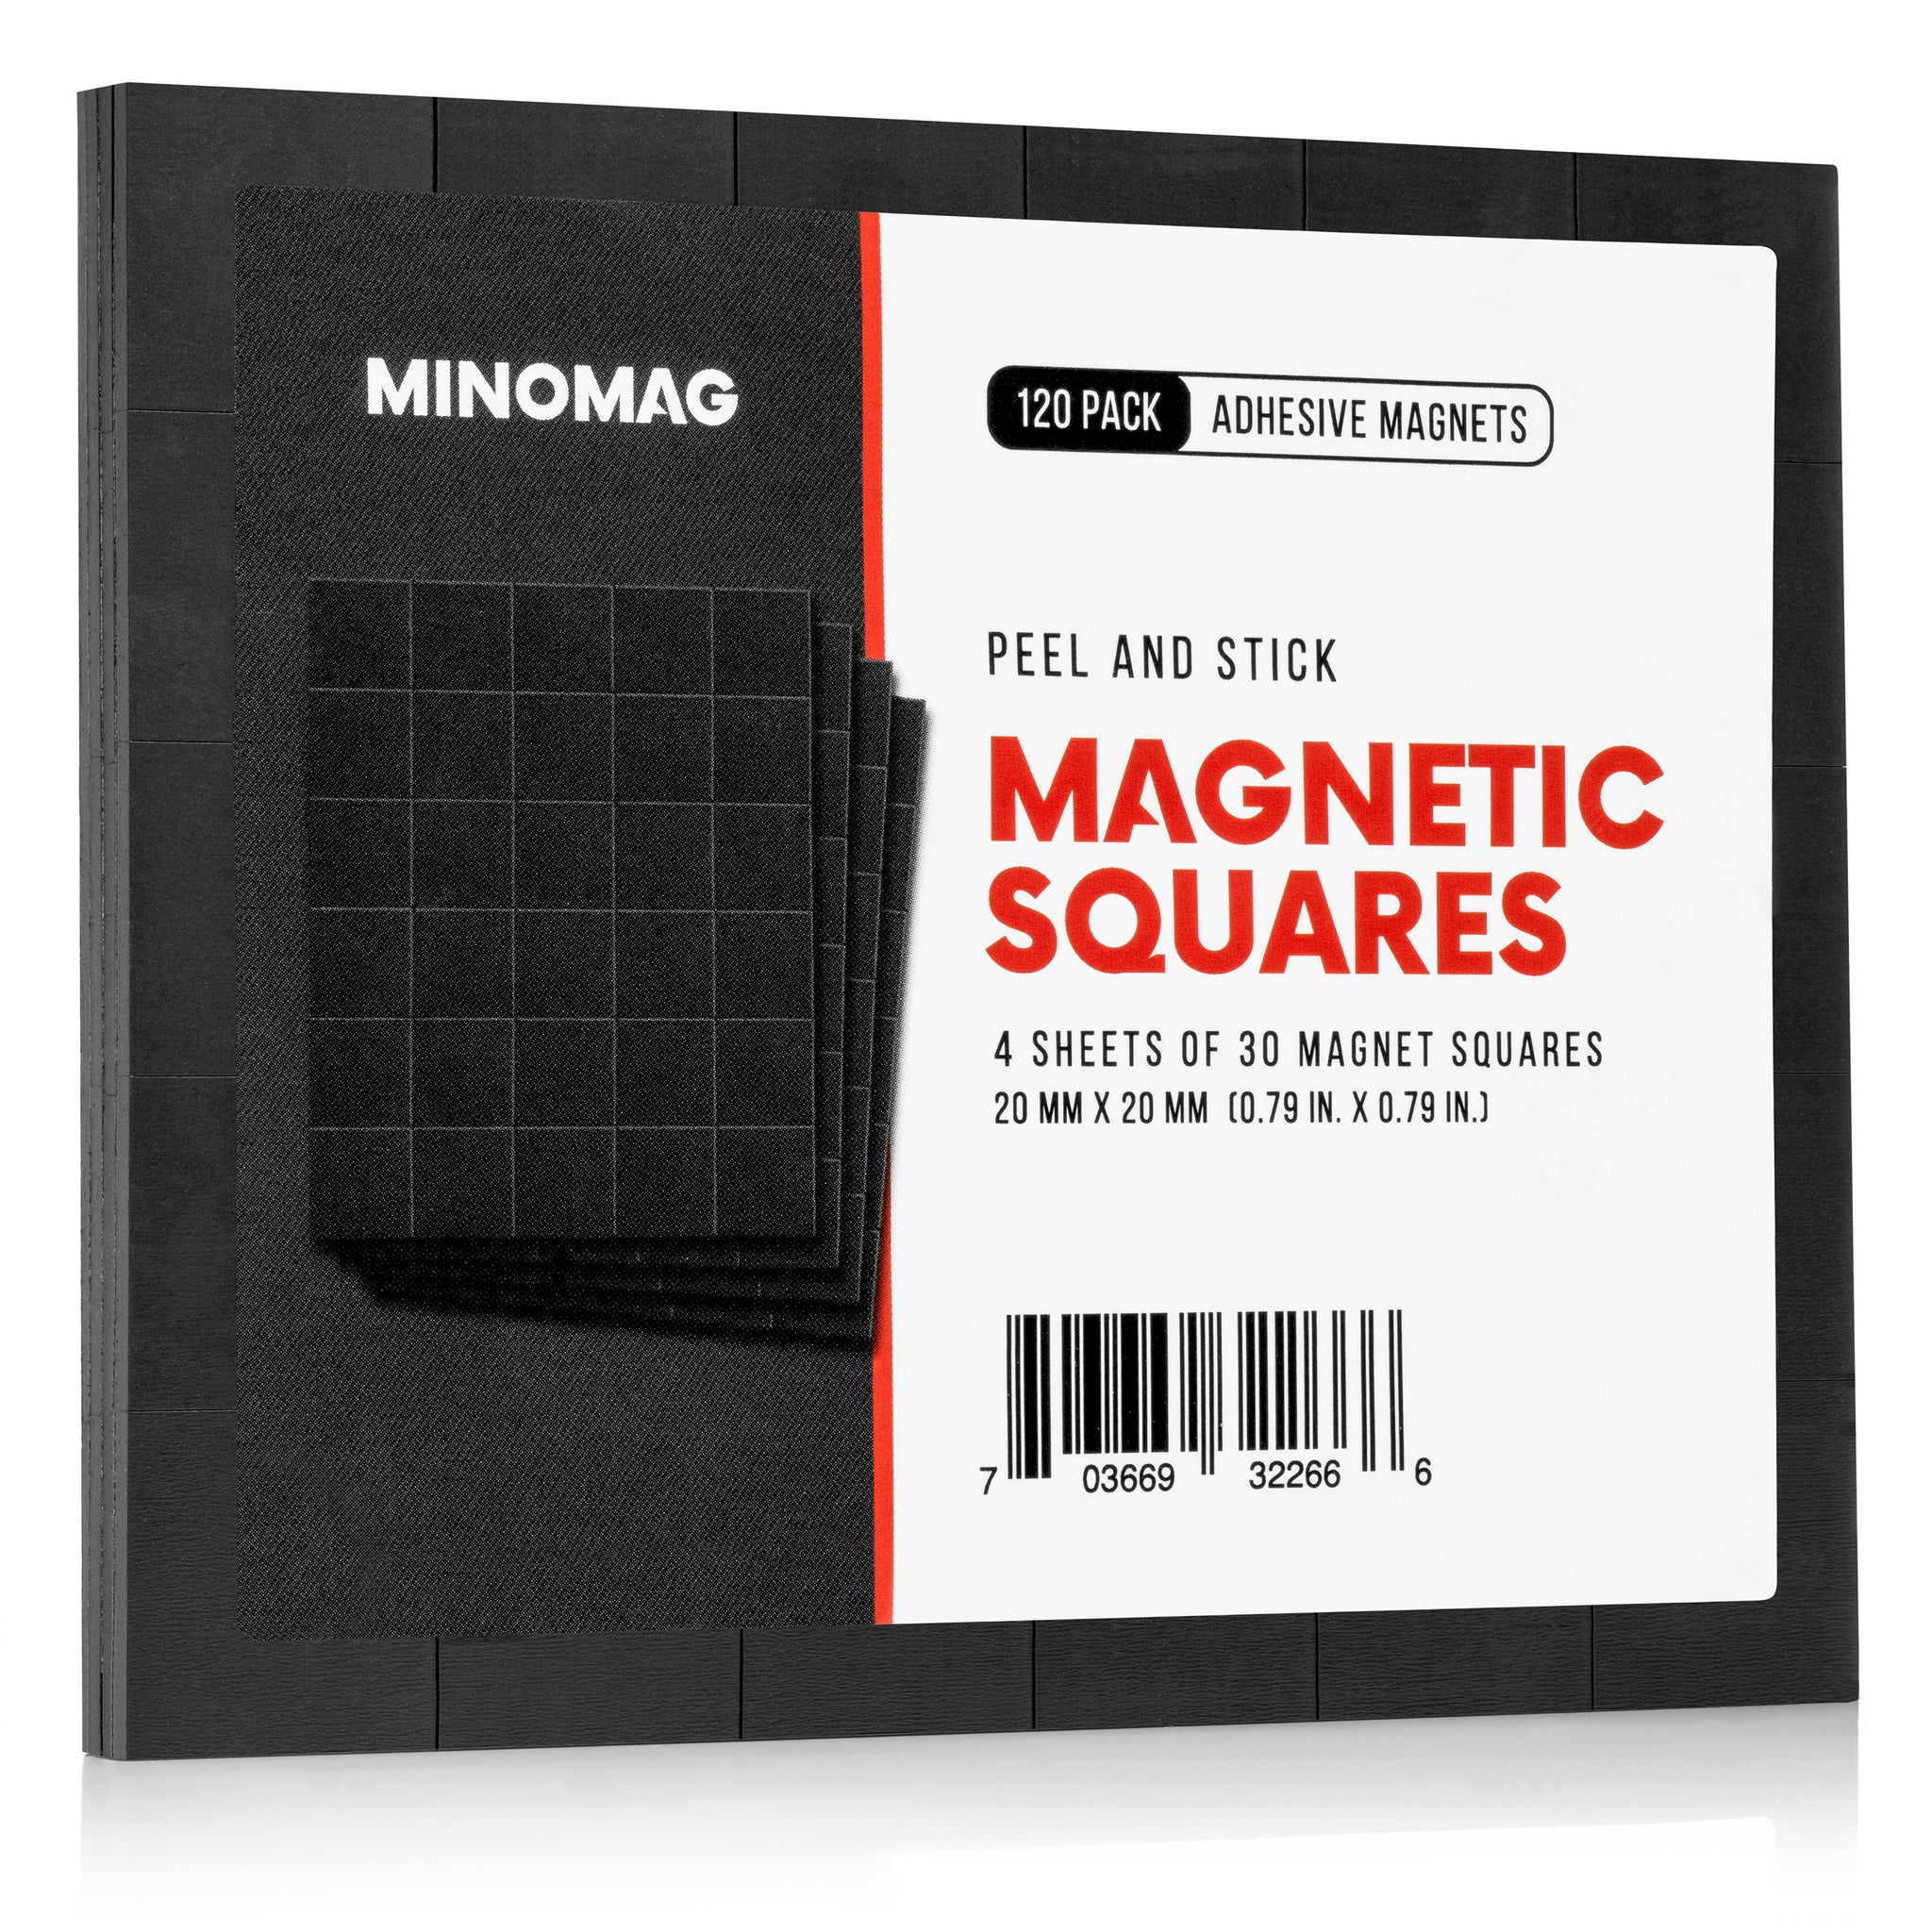  Magnefic Magnetic Squares, 1 Tape Sheet of 70 Magnetic Squares  (Each 20x20x2mm), Magnet on one Side, Self Adhesive on The Other Side.  Perfect for Fridge Organisation, Art Project, Vision Board 